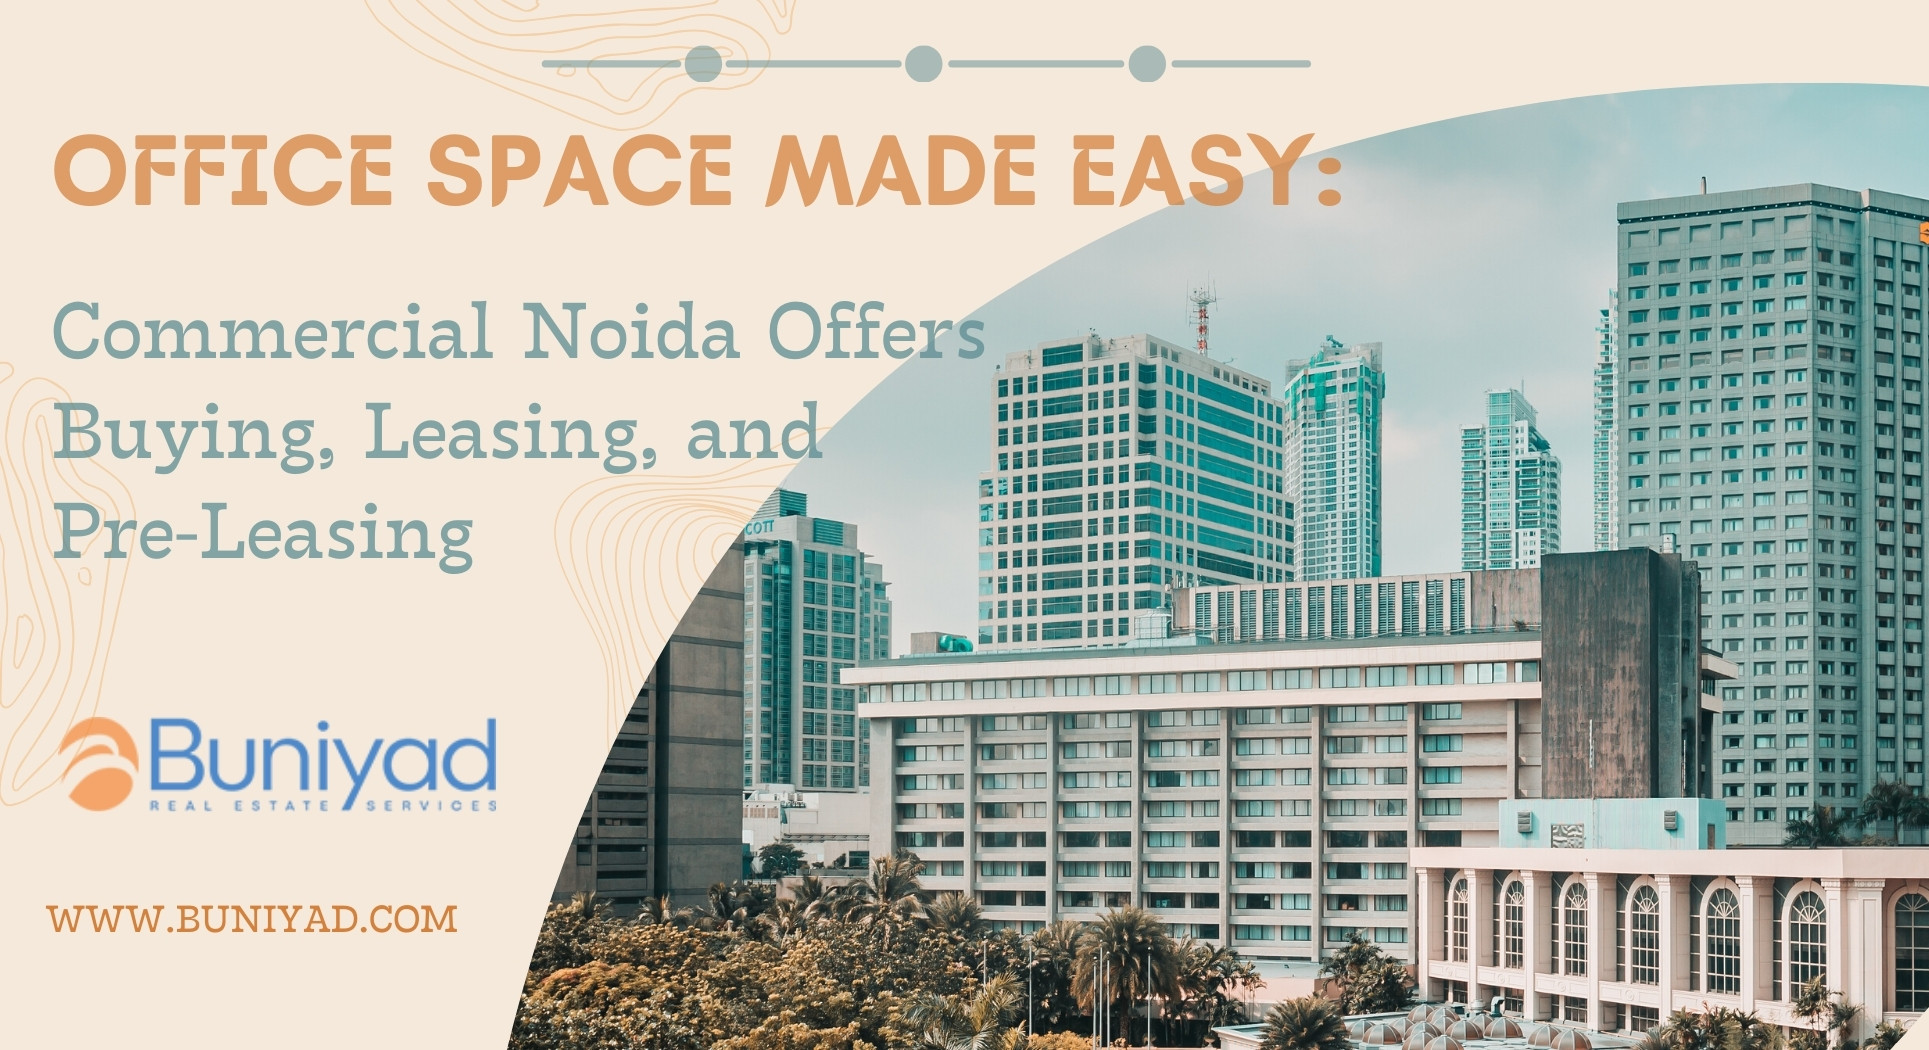 Investing in office space in Noida is brilliant business work for companies looking to establish a long-term business.